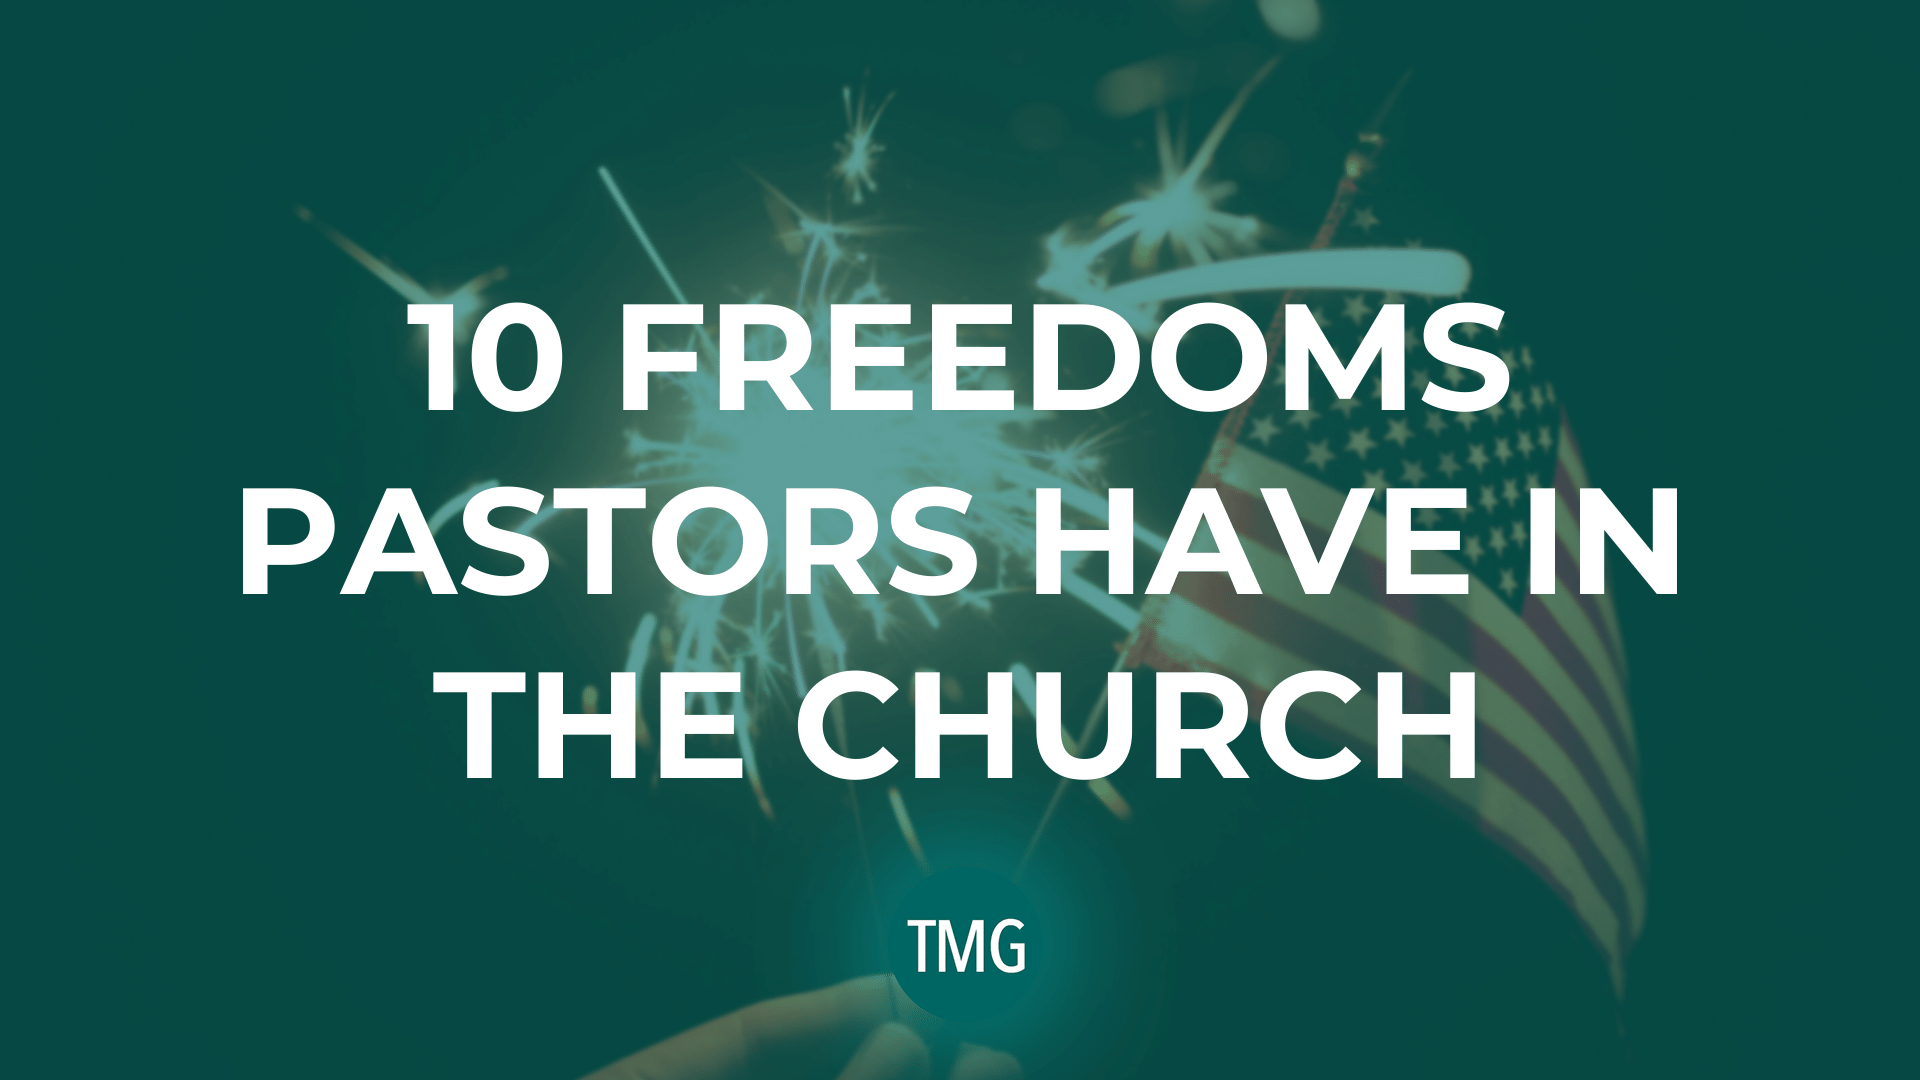 10-ten-freedoms-pastors-have-in-the-church-the-malphurs-group-the-church-revitalization-podcast